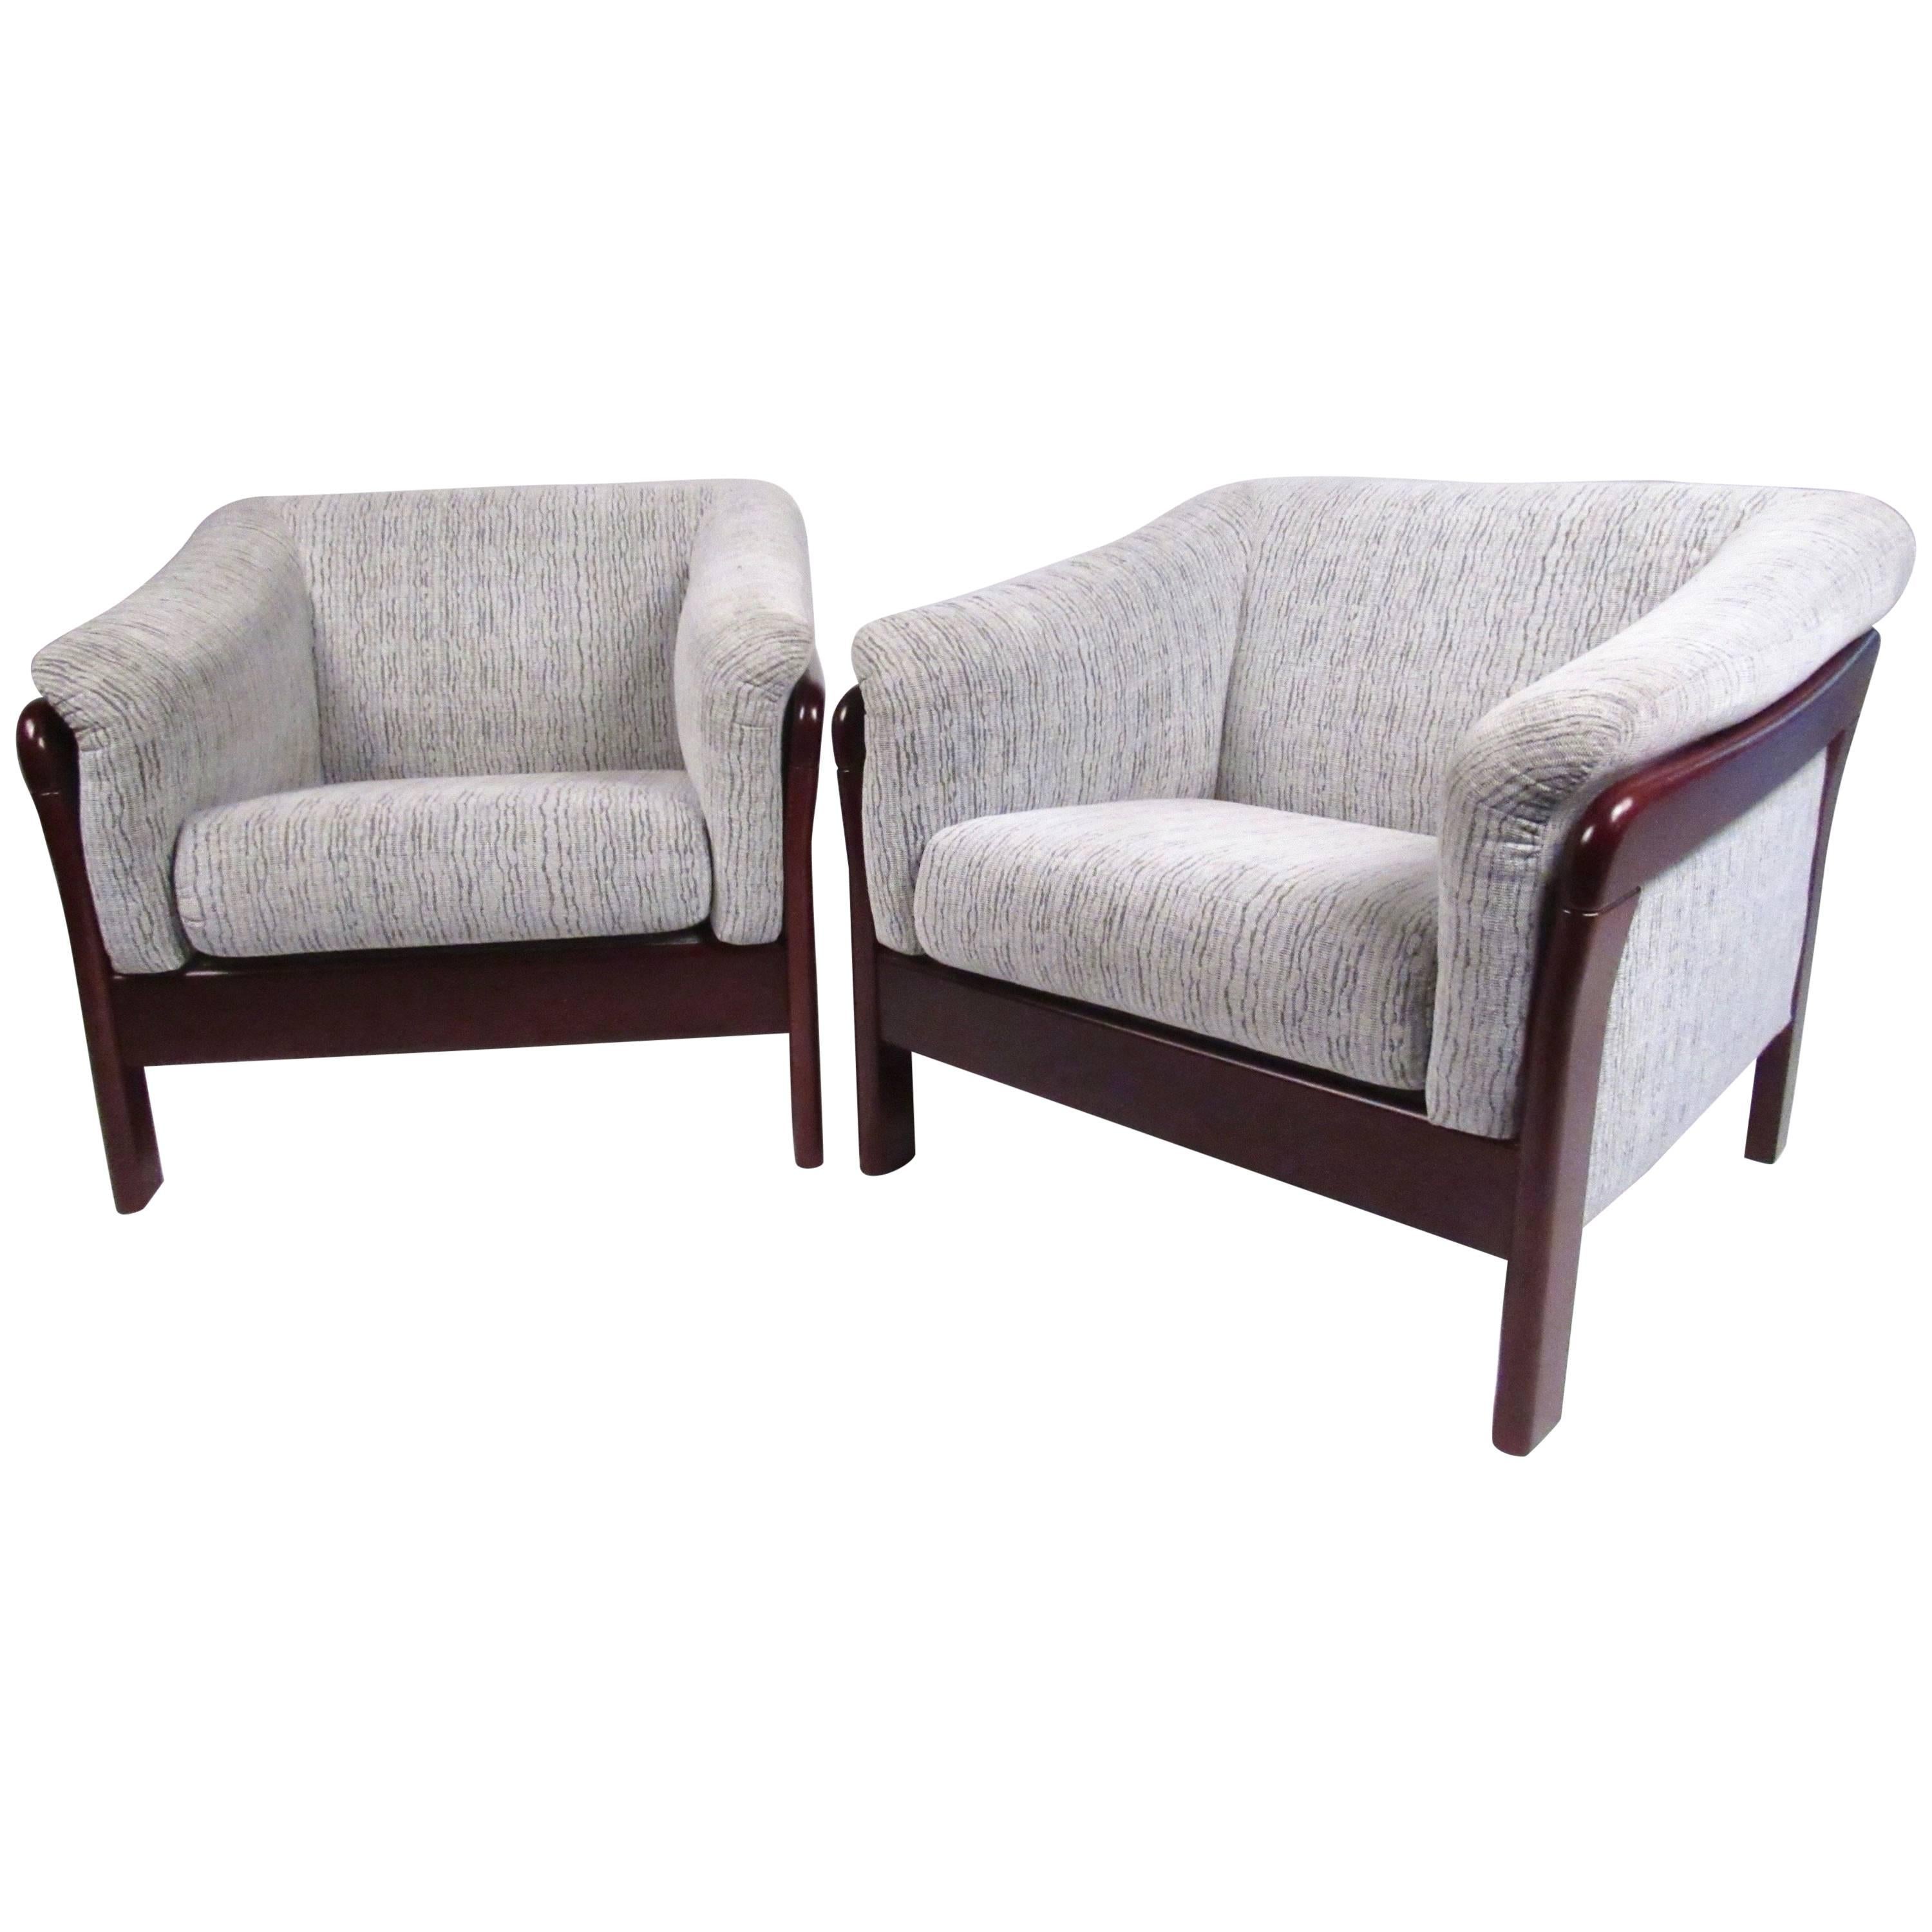 Pair of Contemporary Modern Lounge Chairs